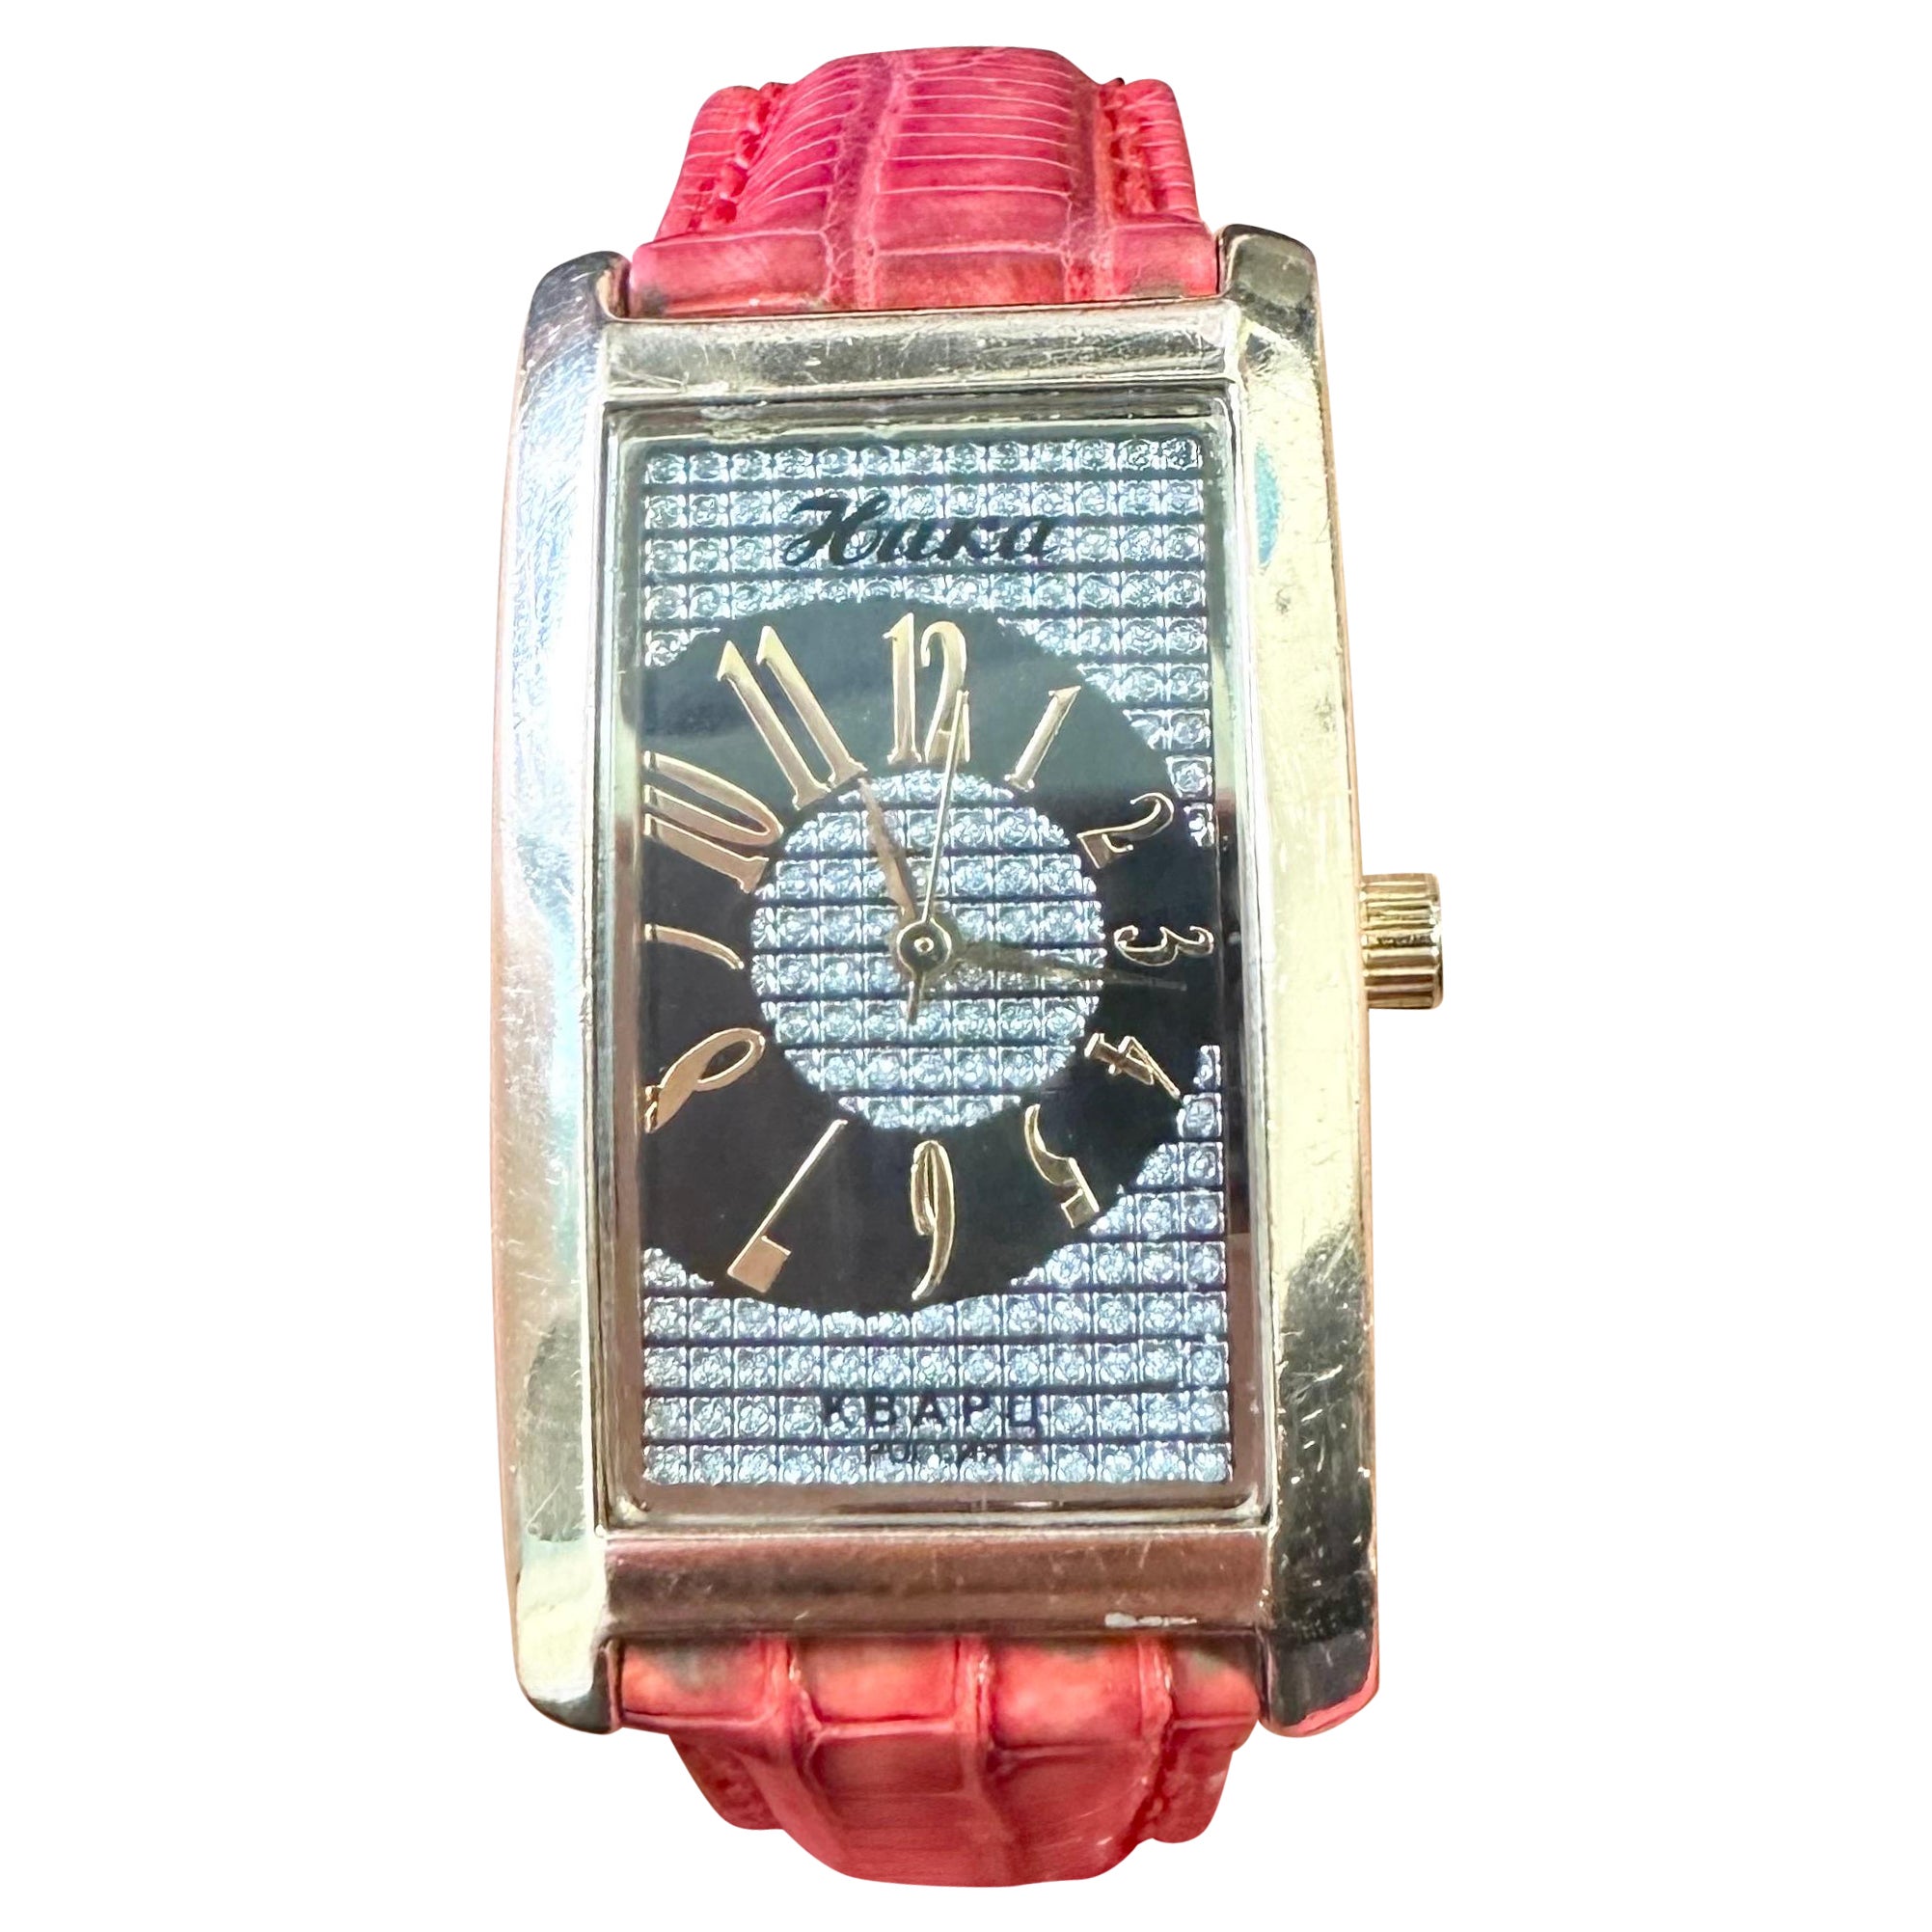 Russian gold watch NIKA 14KT solid gold watch 